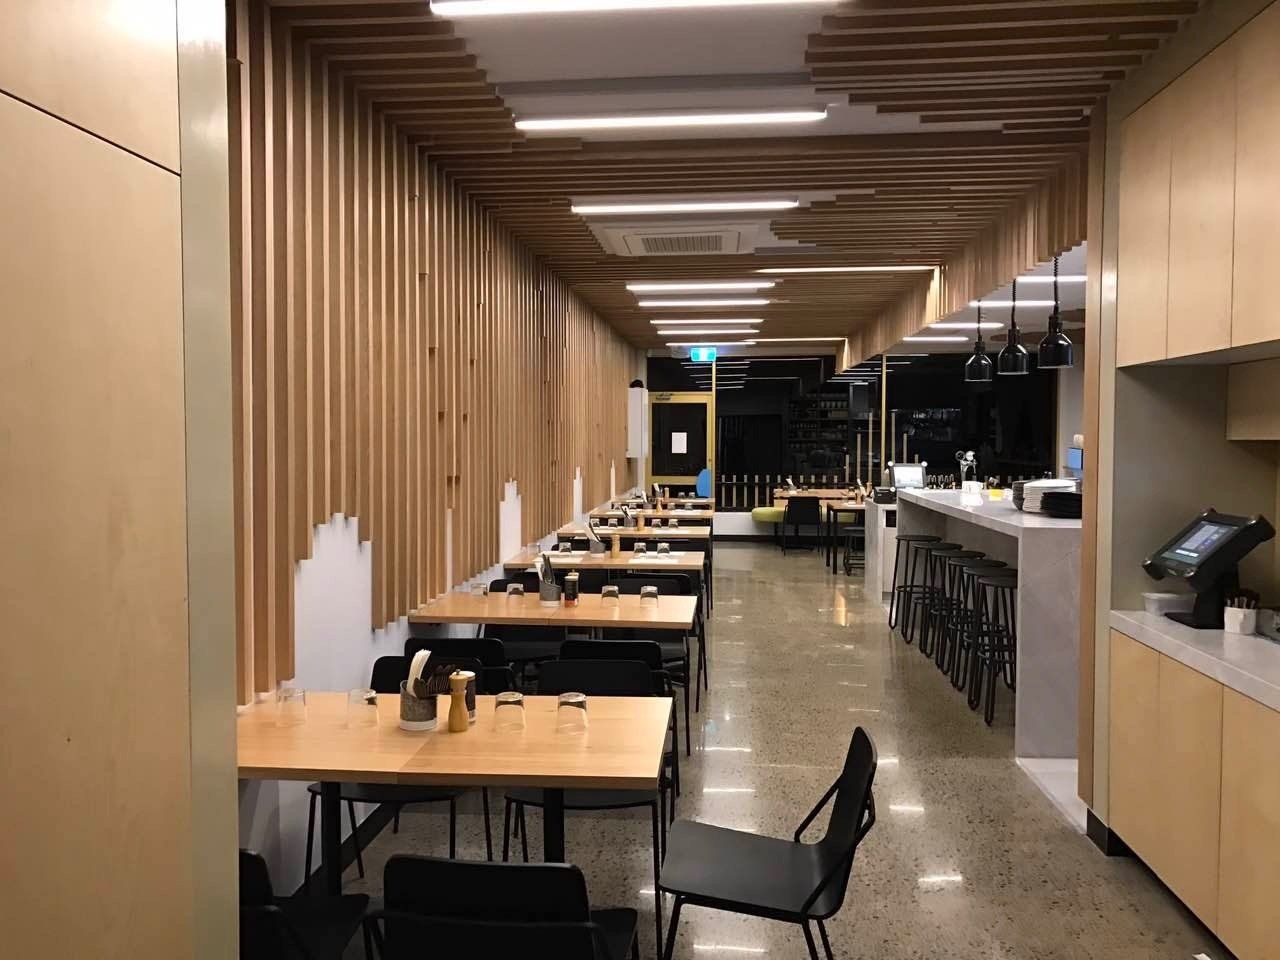 Retail interior Fit-out and renovation service in Melbourne